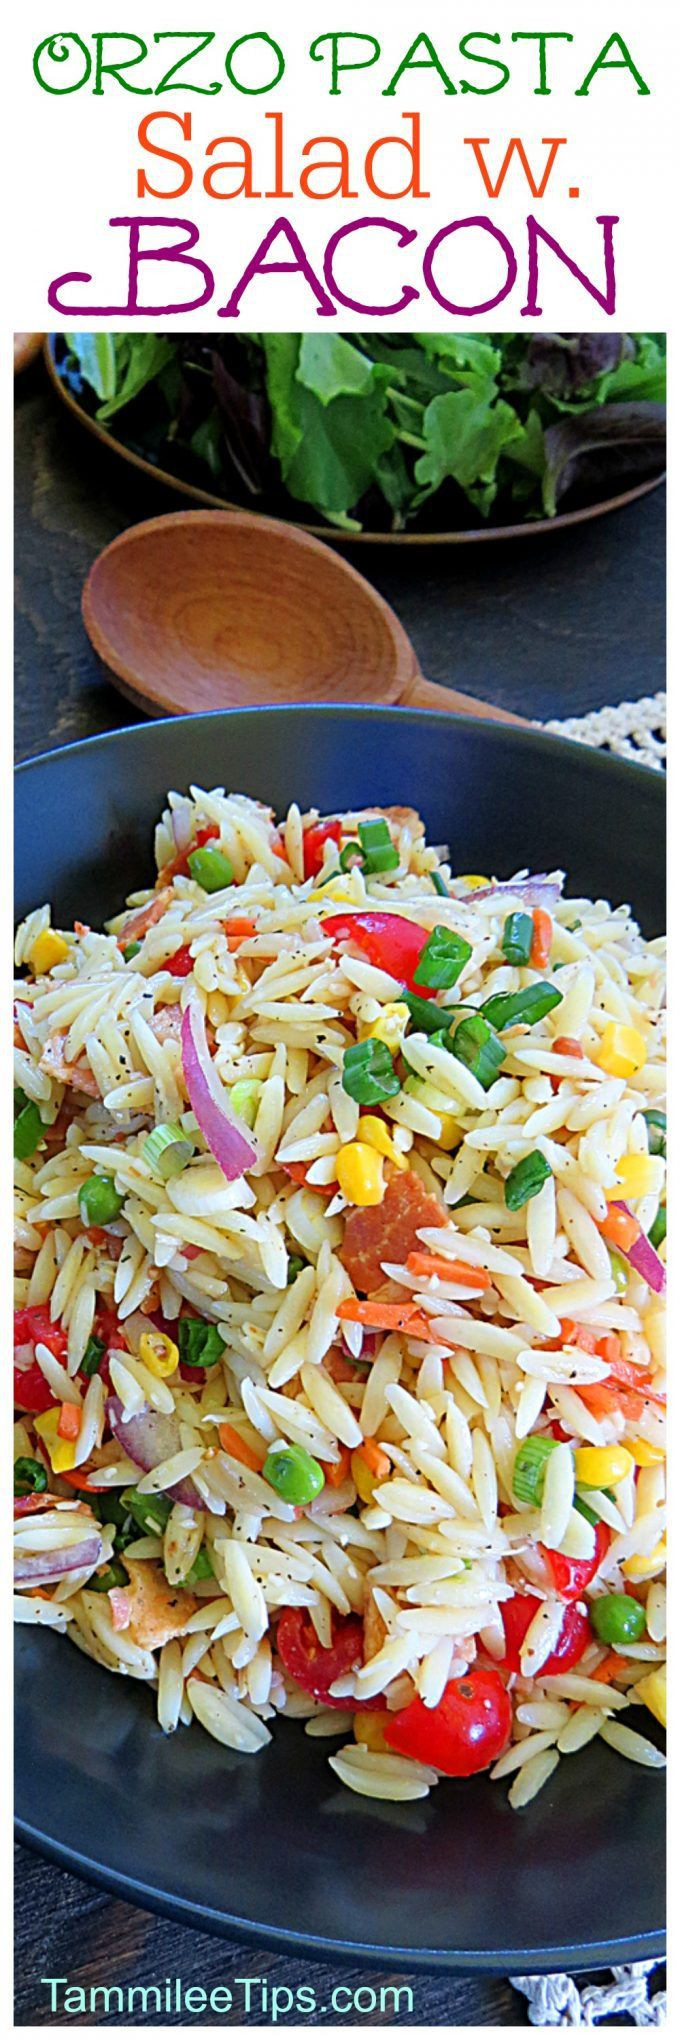 Side Dishes To Bring To A Party
 Easy Cold Orzo Pasta Salad with Bacon & Parmesan